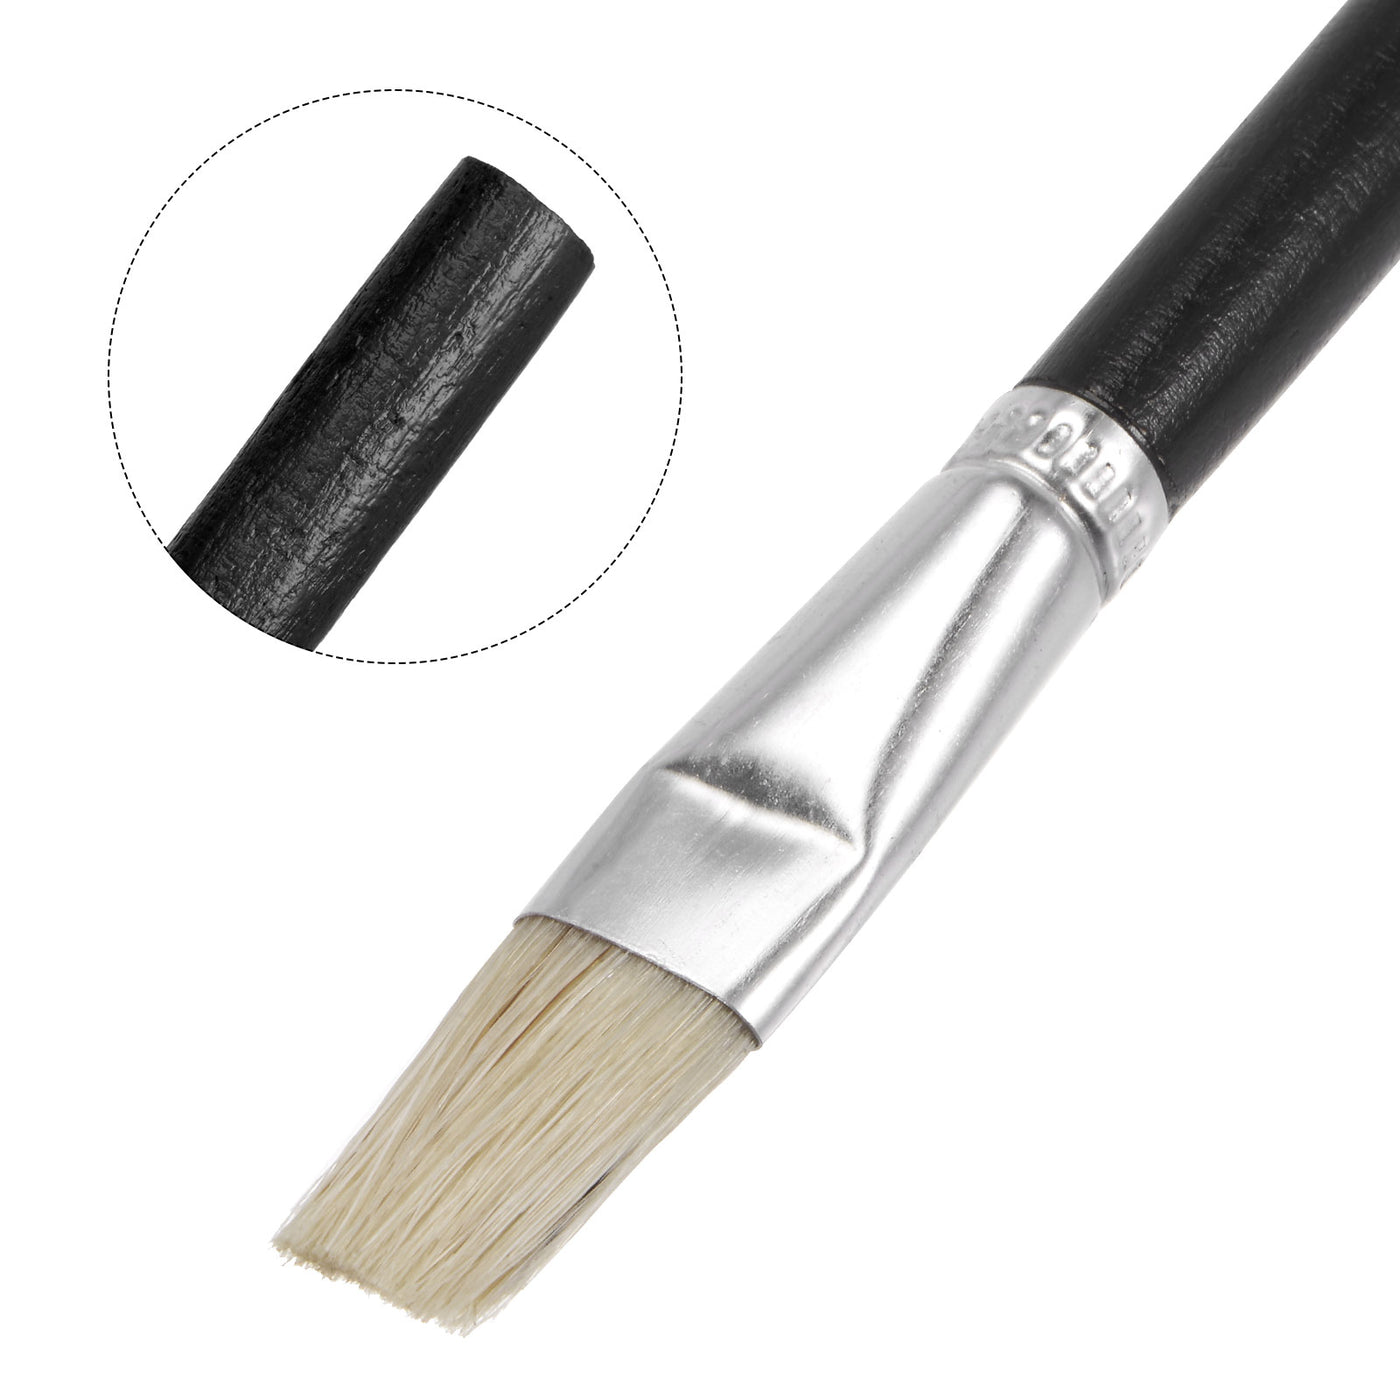 uxcell Uxcell Paint Brushes Flat Edge 0.59" Width 0.18" Thick Bristle with Wood Handle 10Pcs